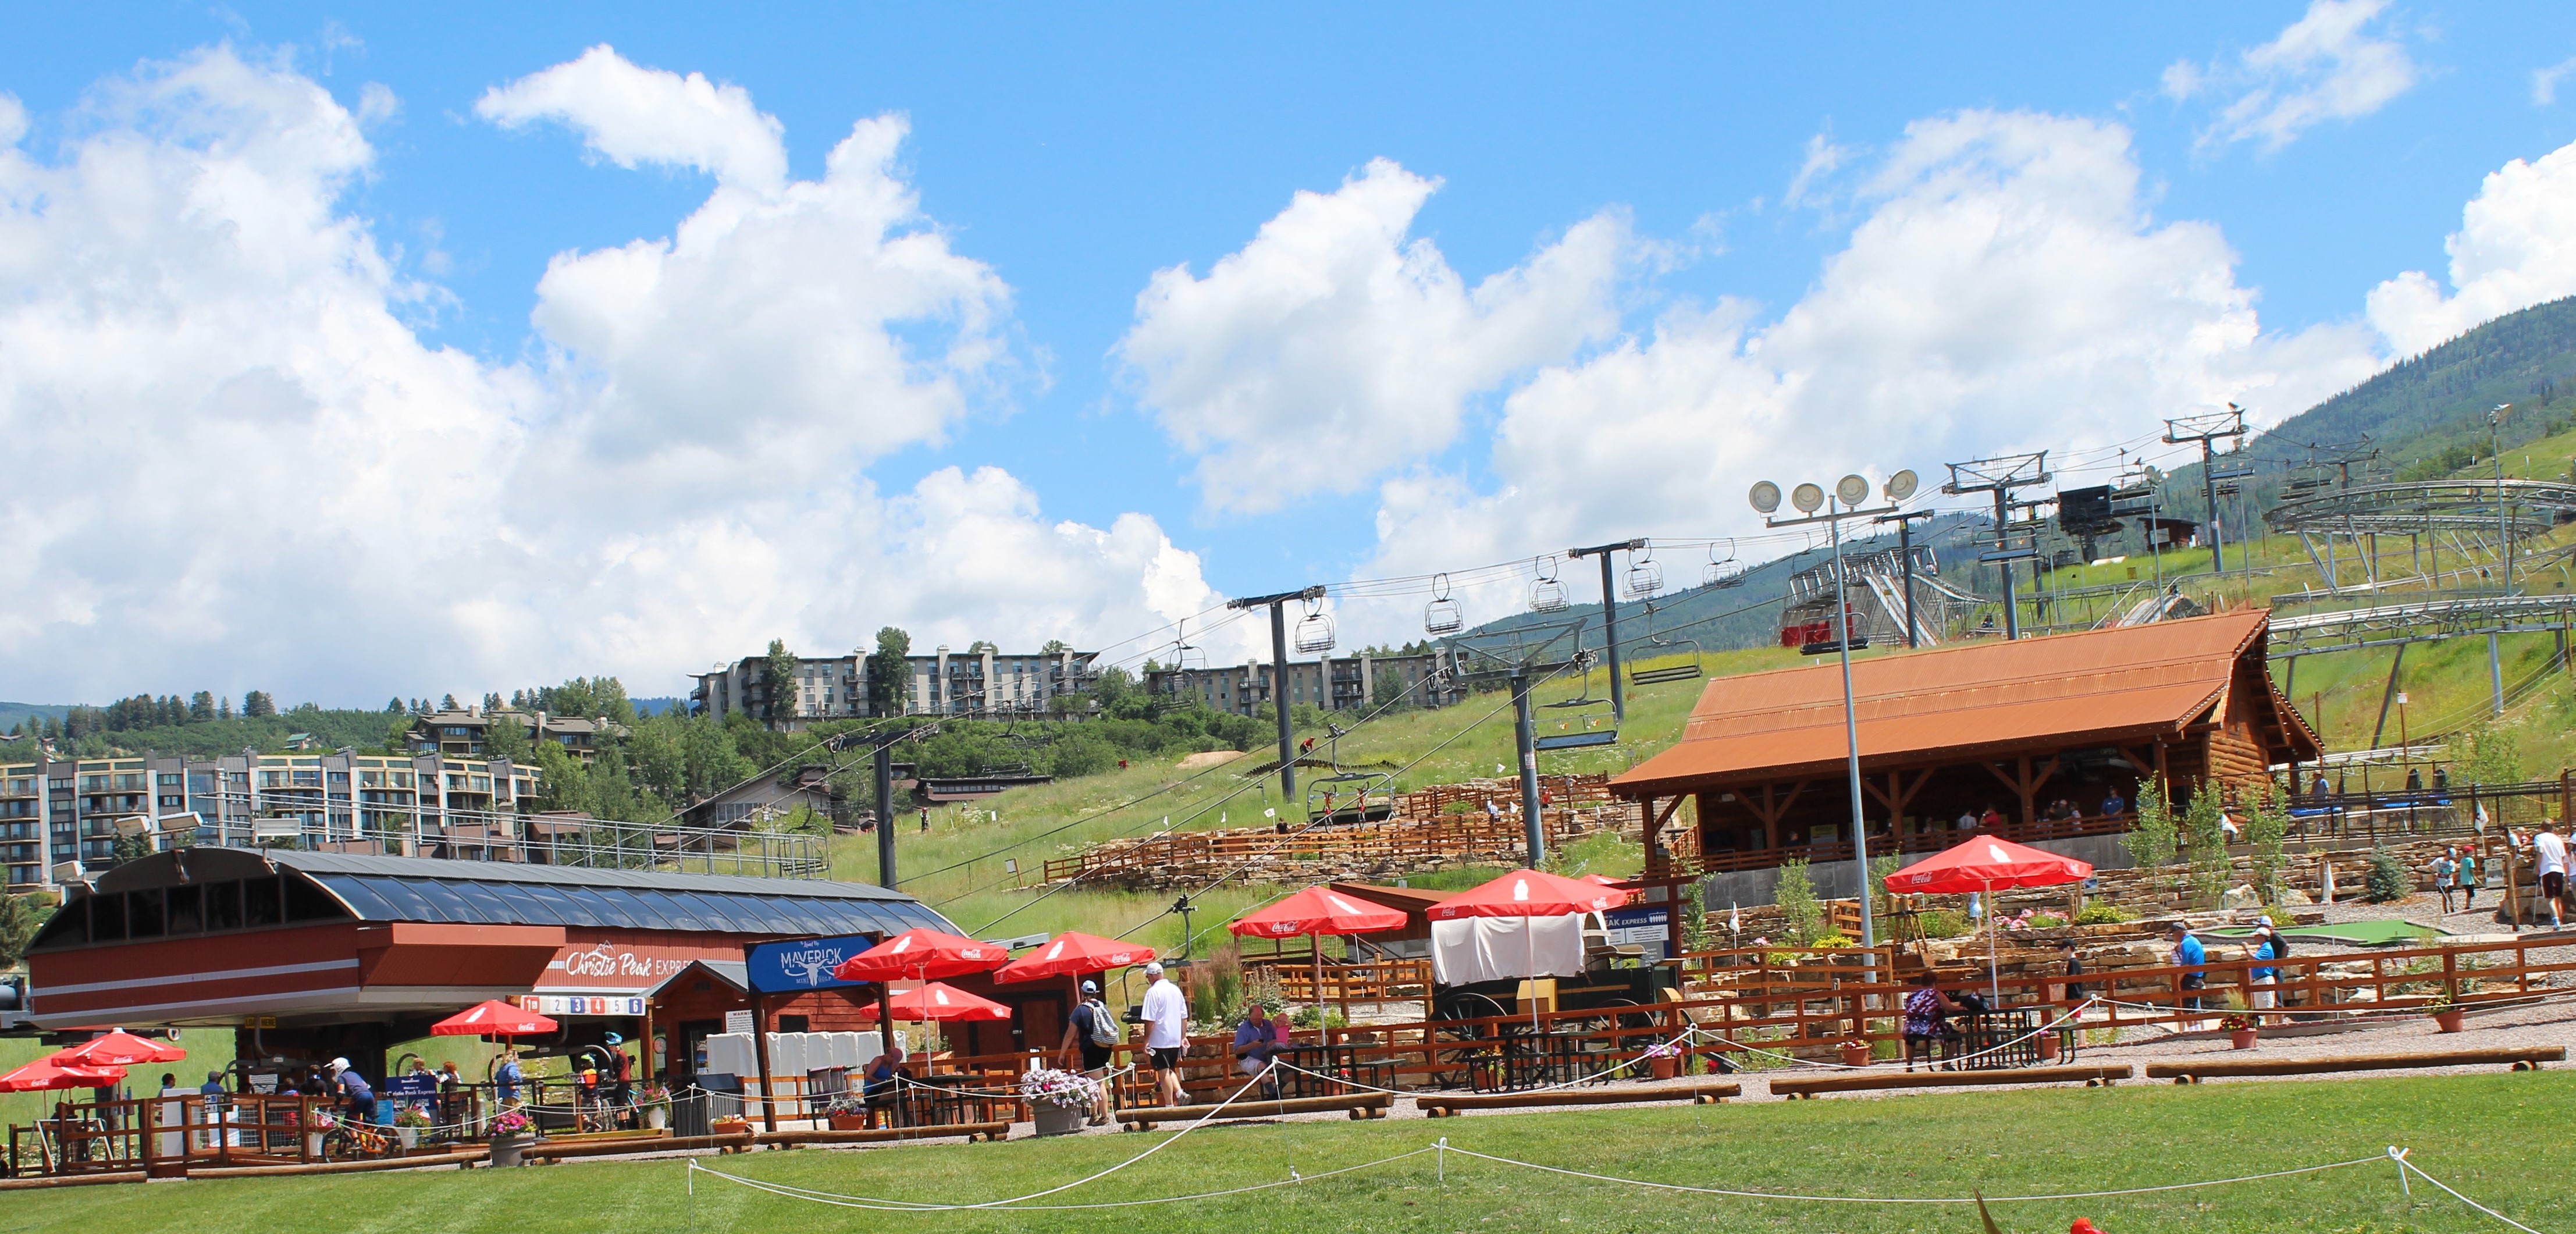 The Land Up at Steamboat Resort in the summer